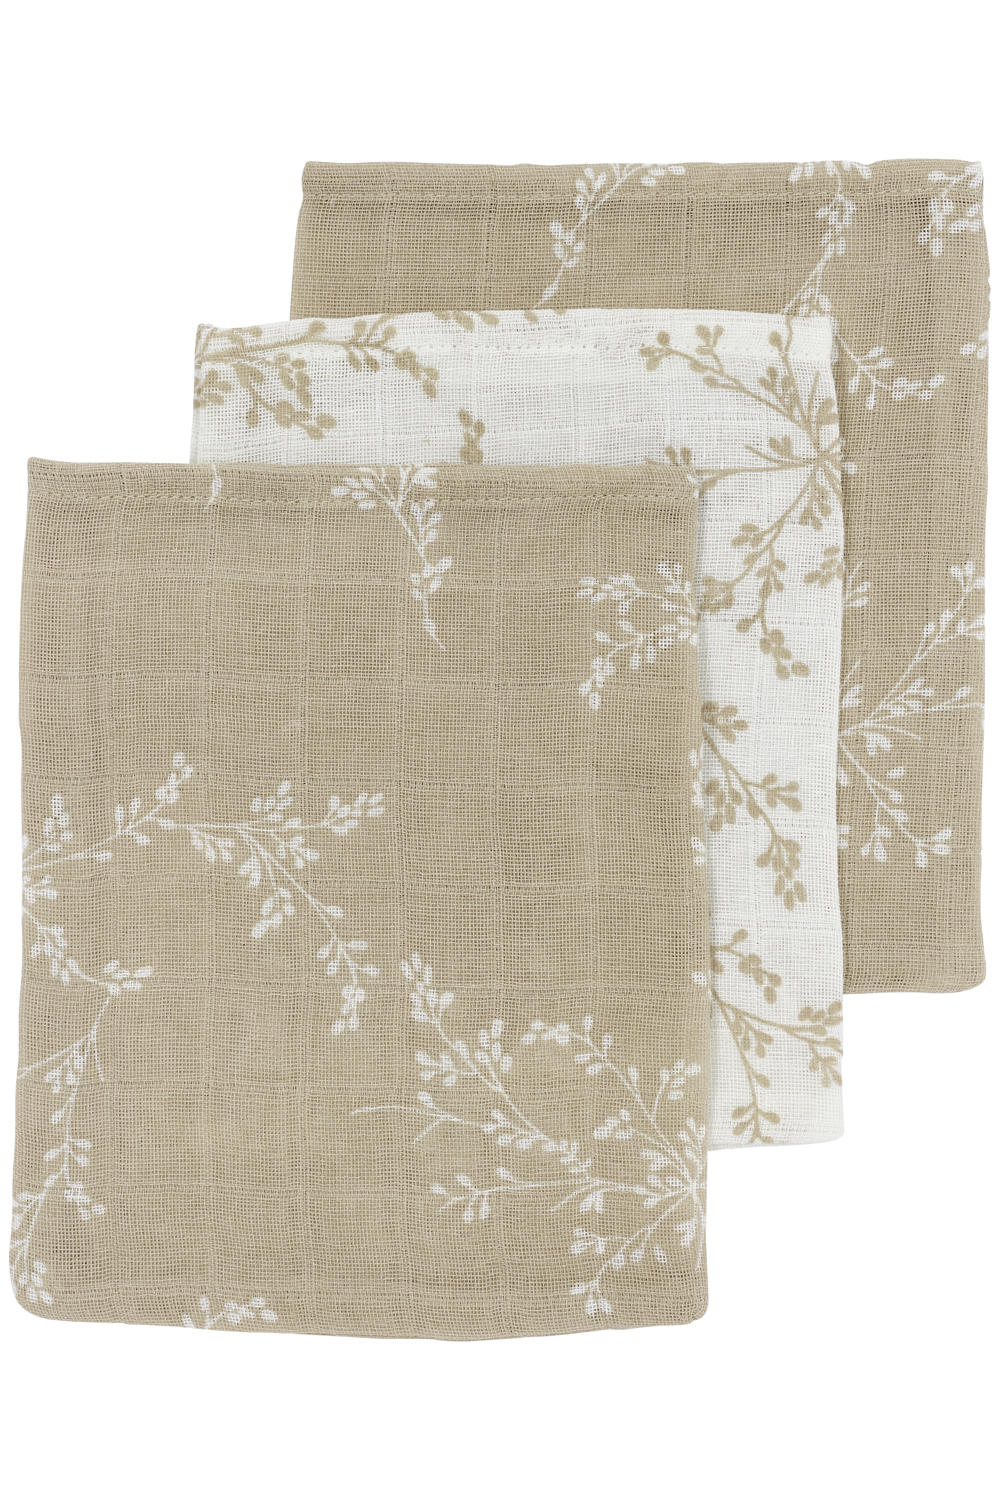 Washcloth 3-pack muslin Branches - sand - 20x17cm